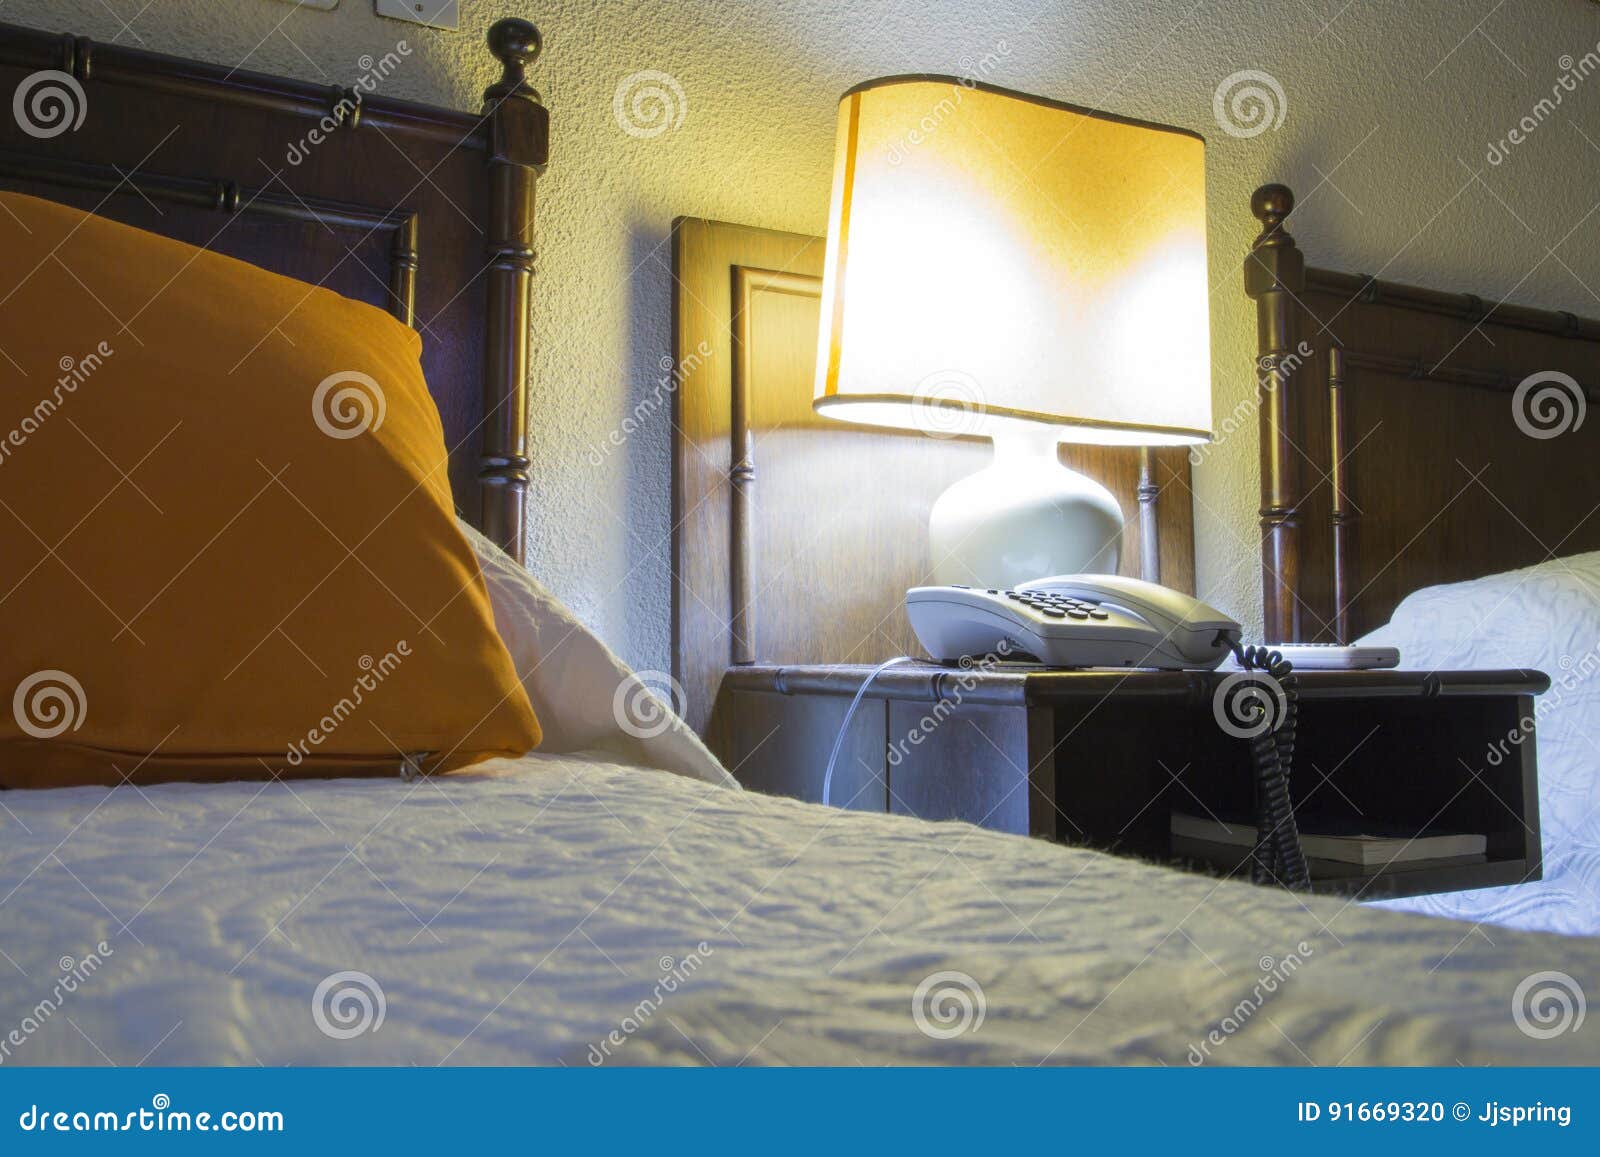 hostel with beds, nightstand and lamp at night